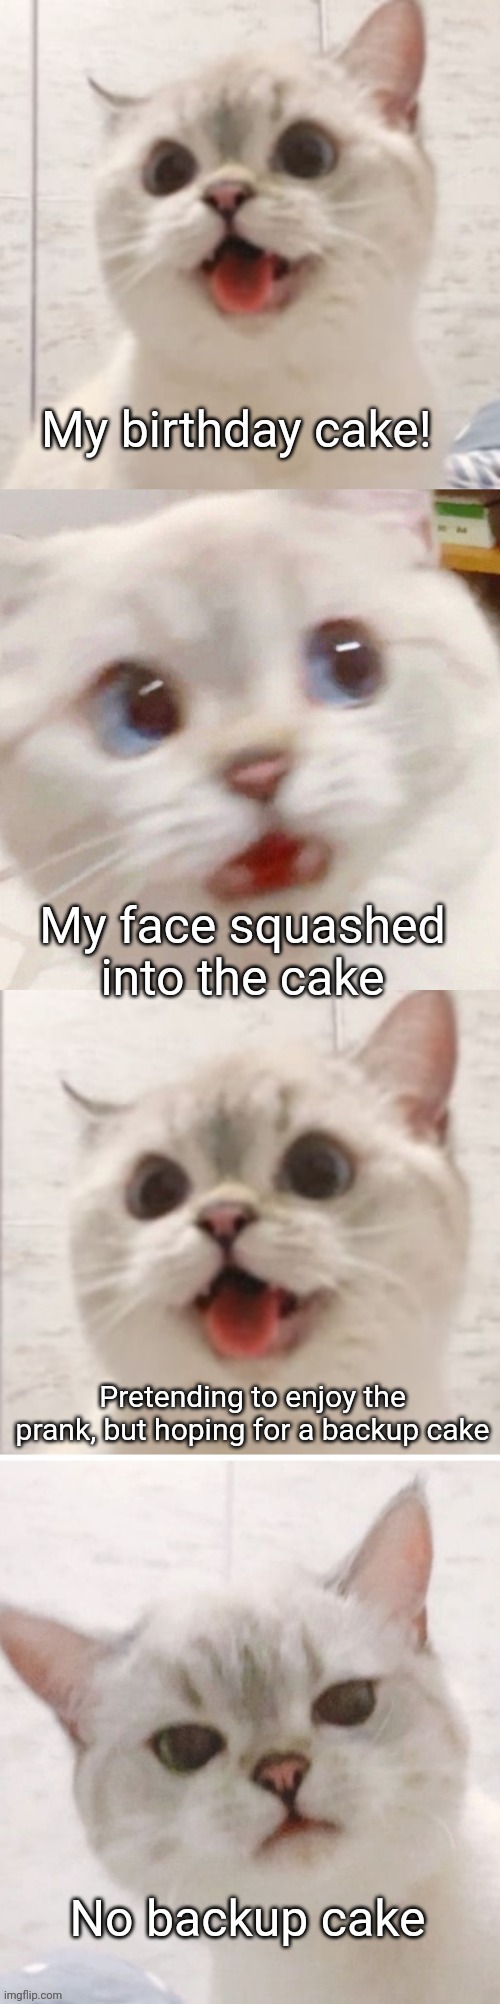 Cat and cake | image tagged in birthday cake,prank,cute cat | made w/ Imgflip meme maker